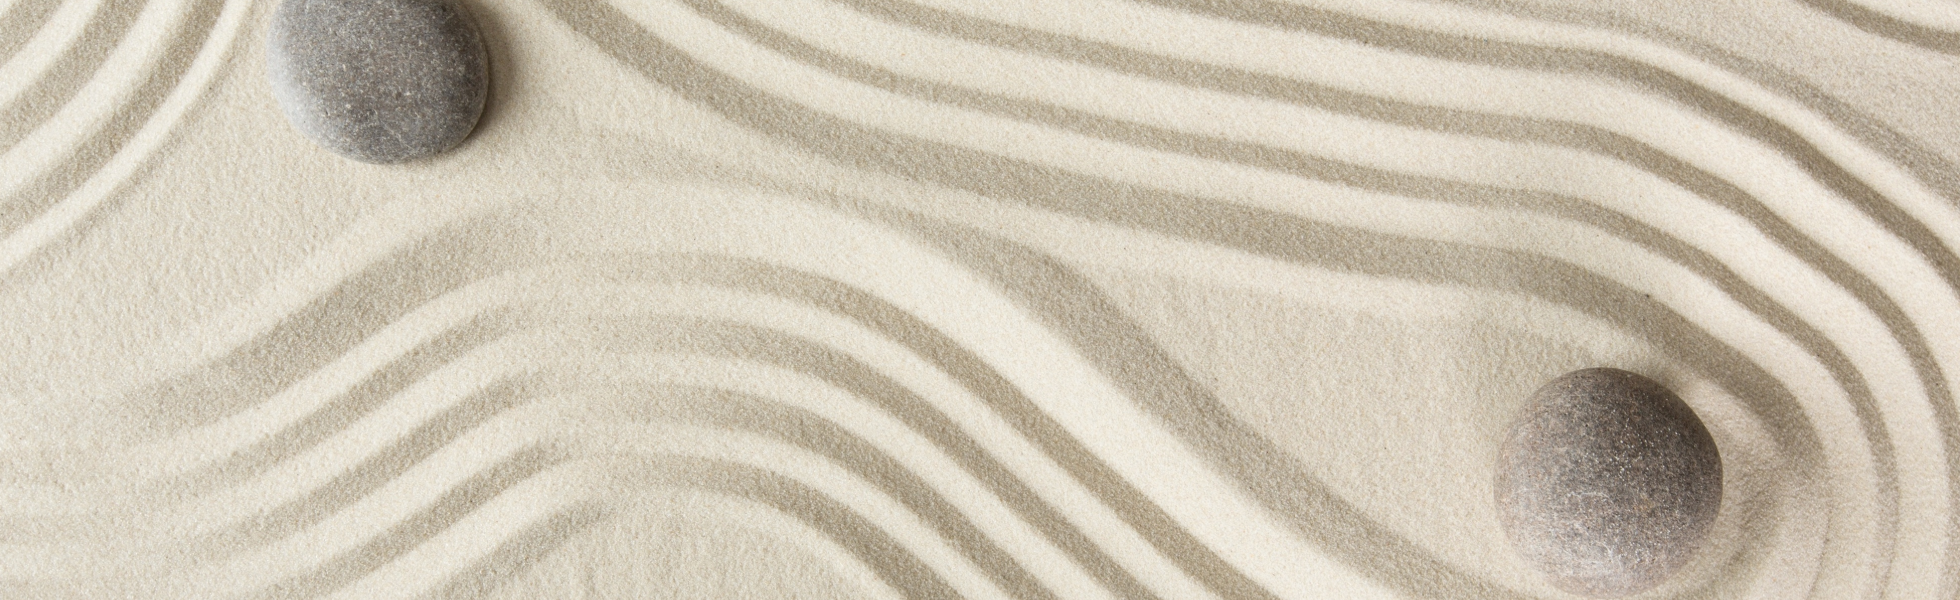 Fine sand combed in a pattern. Two smooth stones lay on top of the sand.